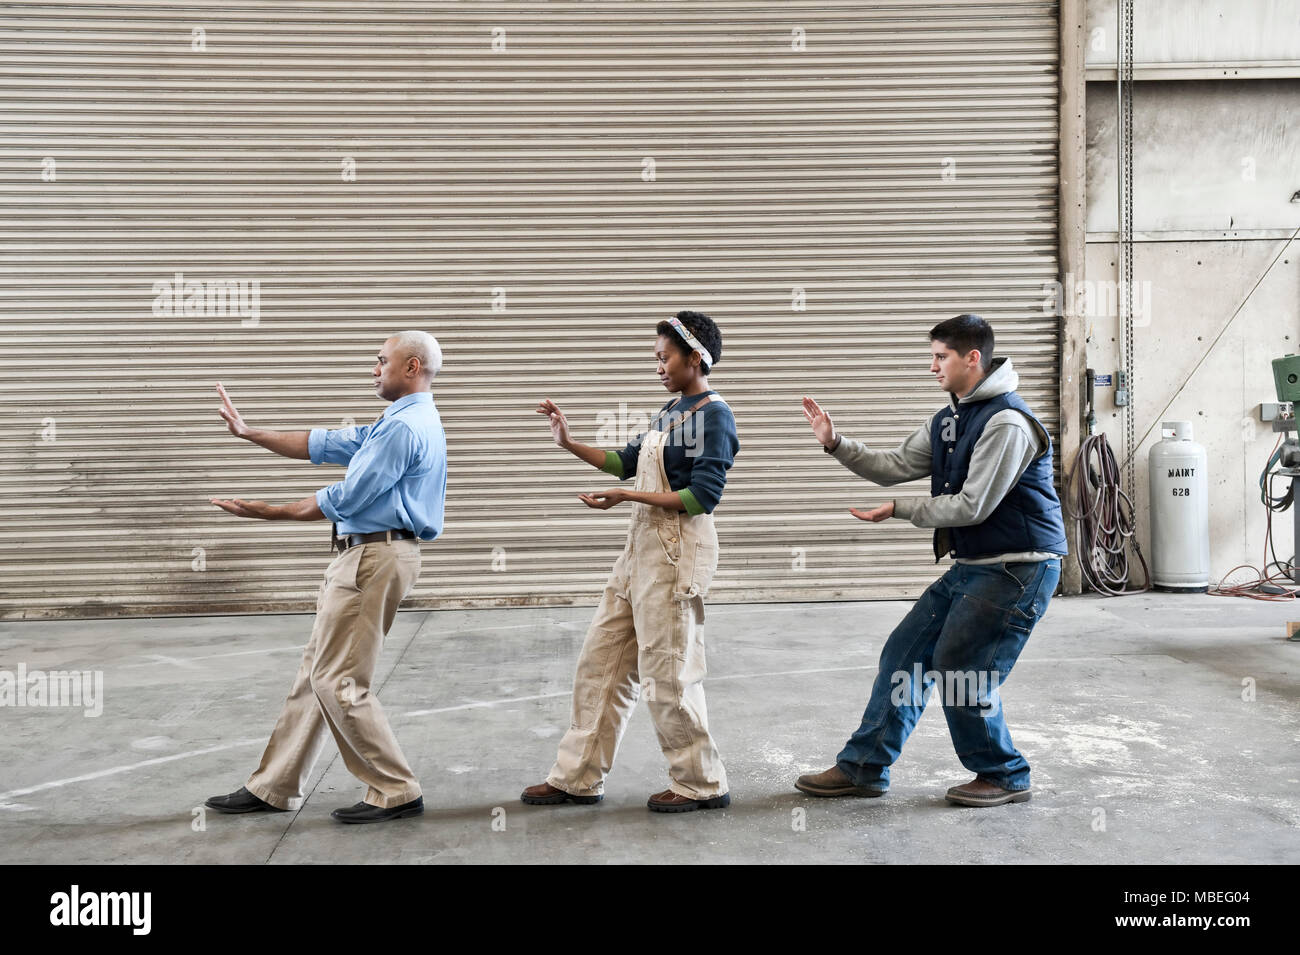 Mixed race group of workers and a black man management peson taking a break on the floor of a factory. Stock Photo